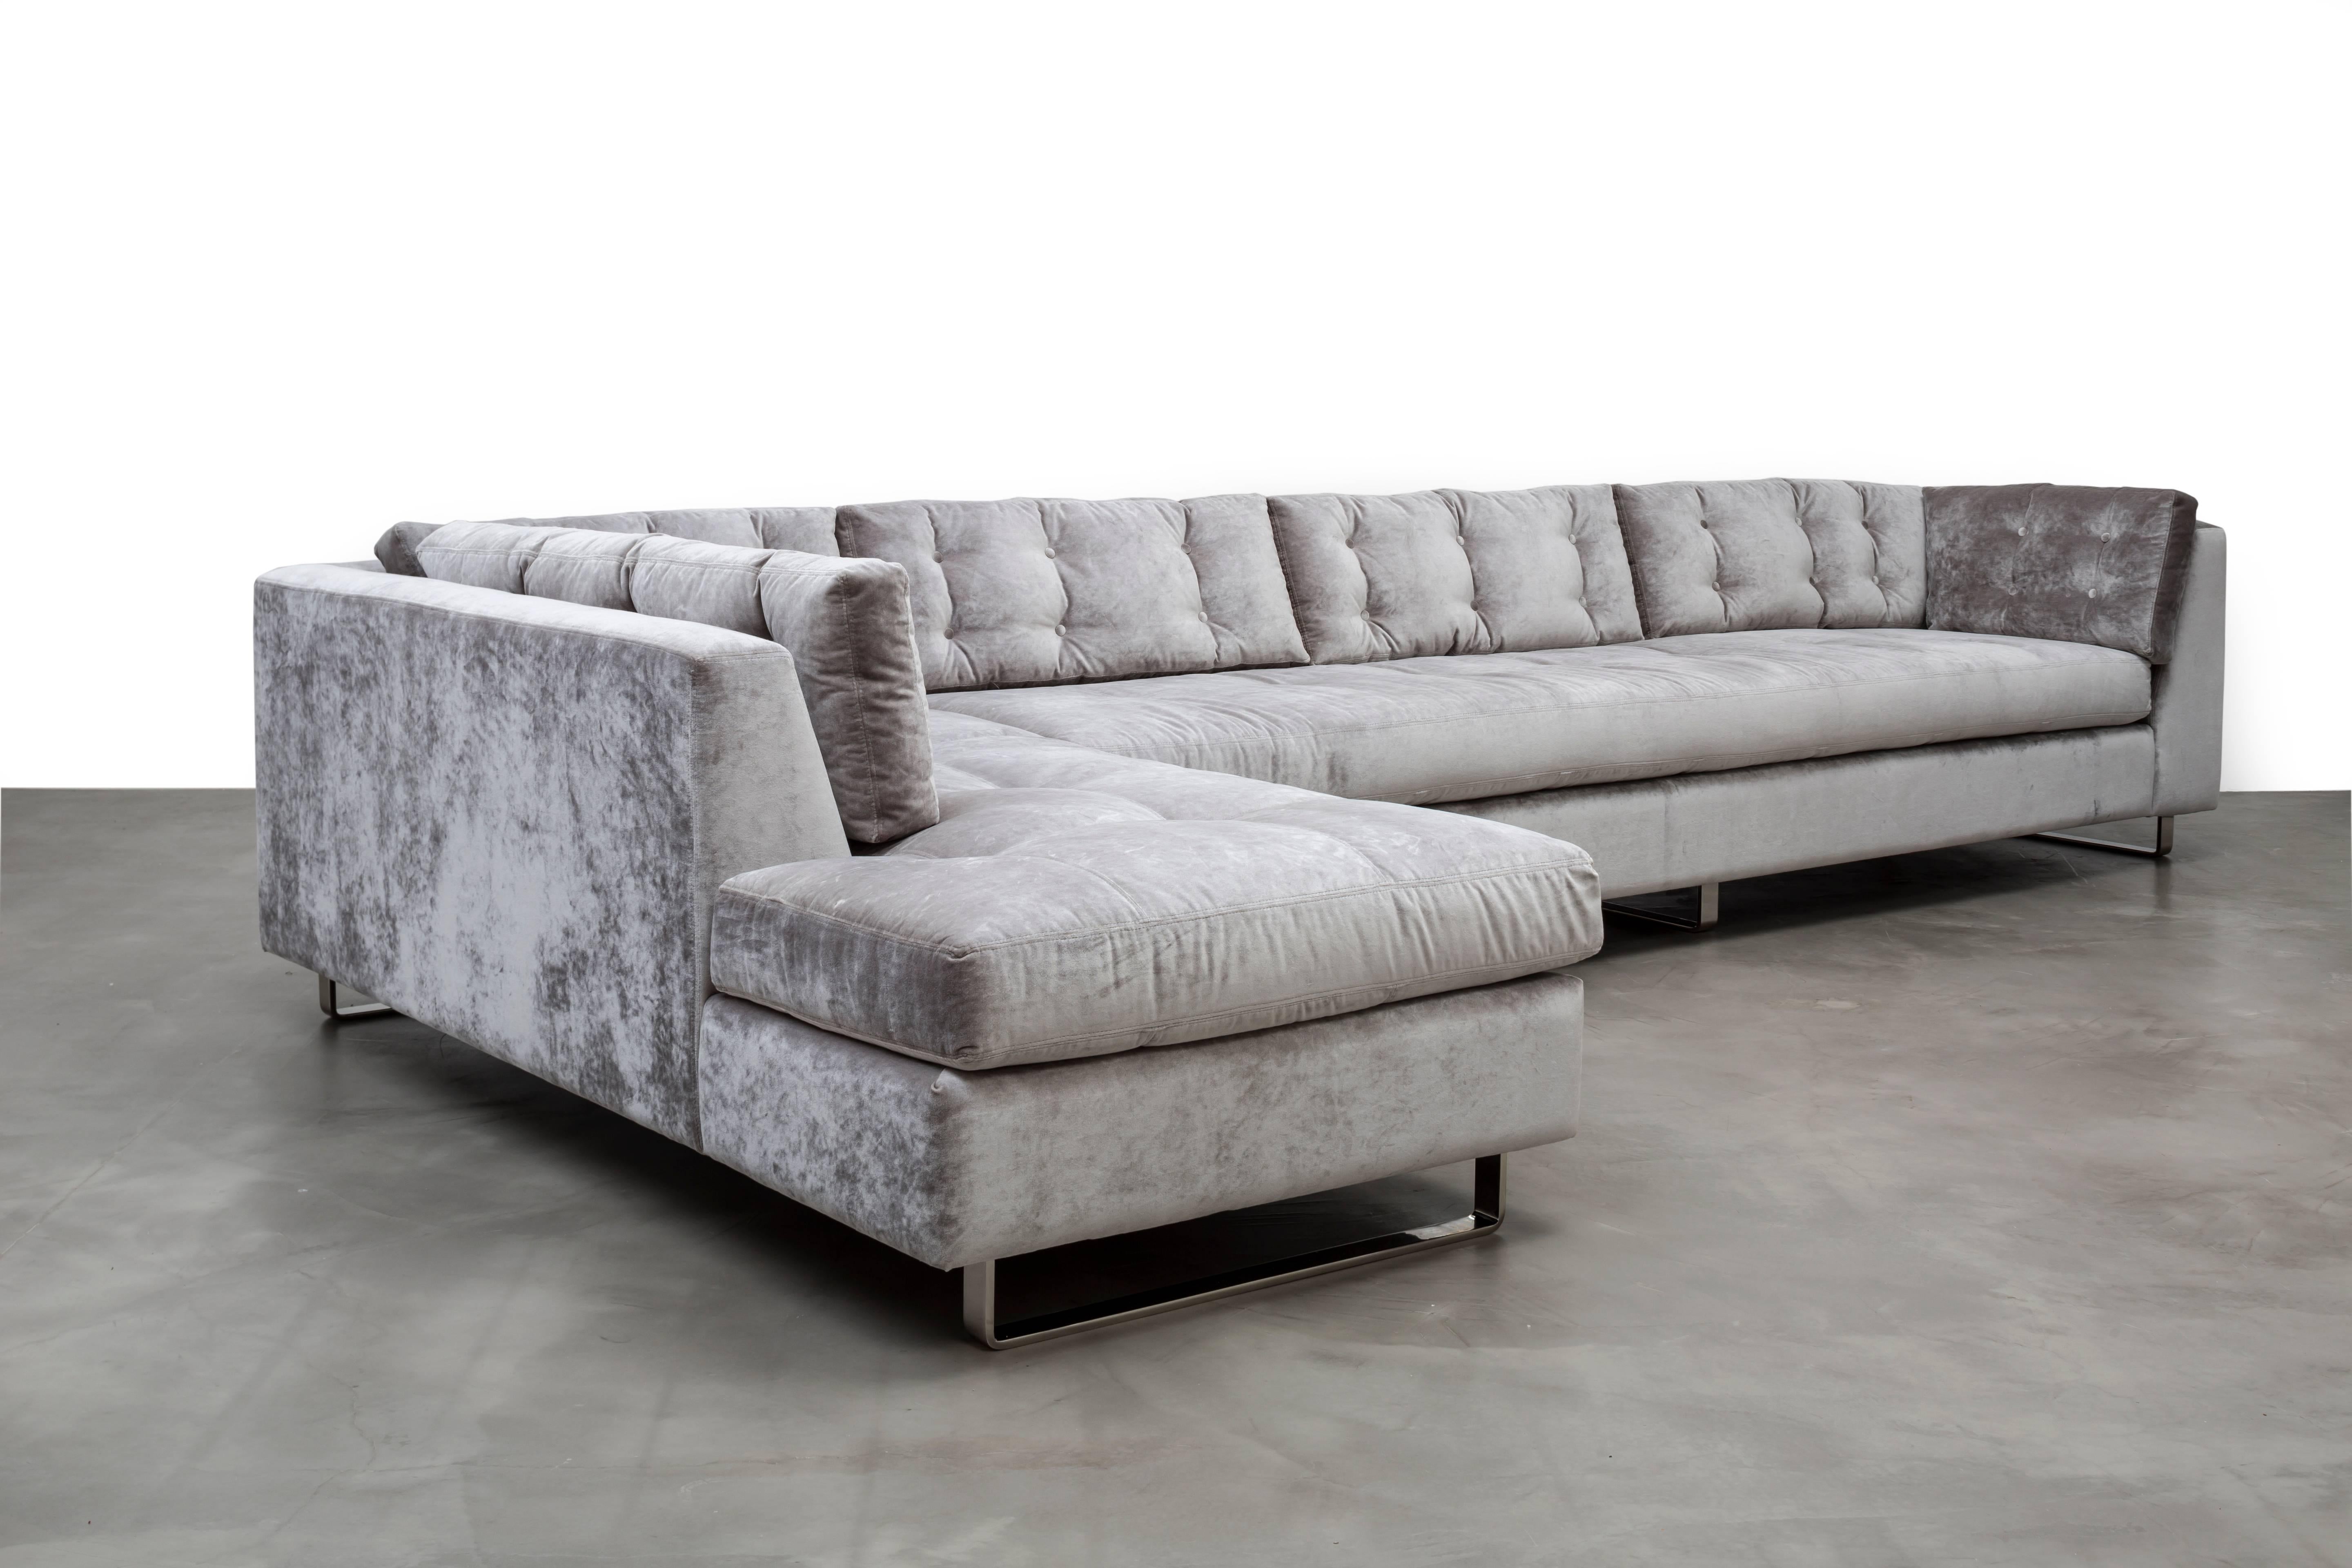 The Sienna Sectional Sofa features modern tufted upholstery over modern metal legs.  Fully custom and made to order in California. As shown in Luxury Velvet $25,730.  Starting at $22,630.